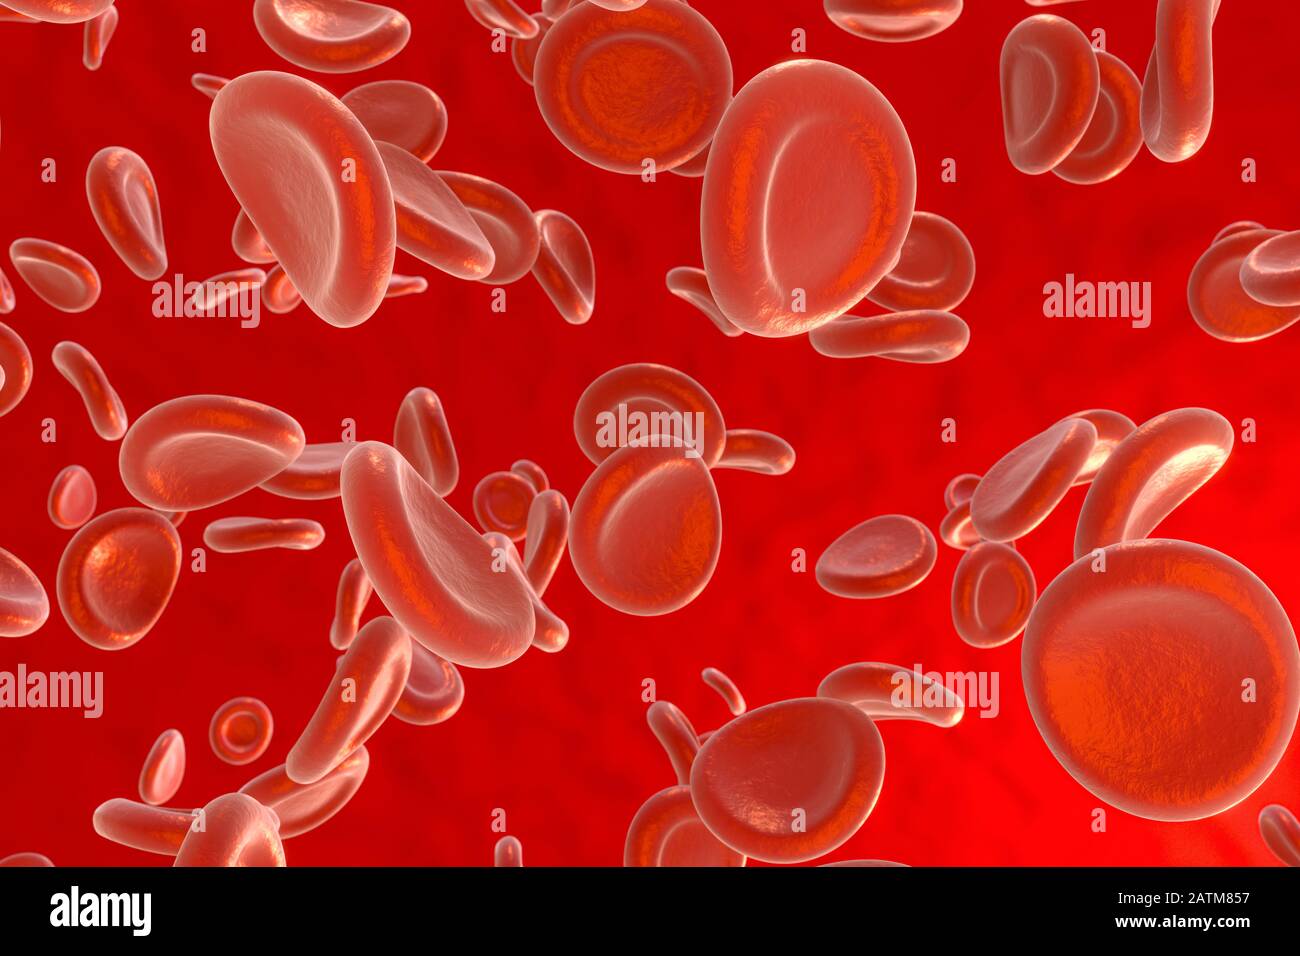 Blood and red blood cells,abstract conception,life and health,3d rendering. Computer digital drawing. Stock Photo